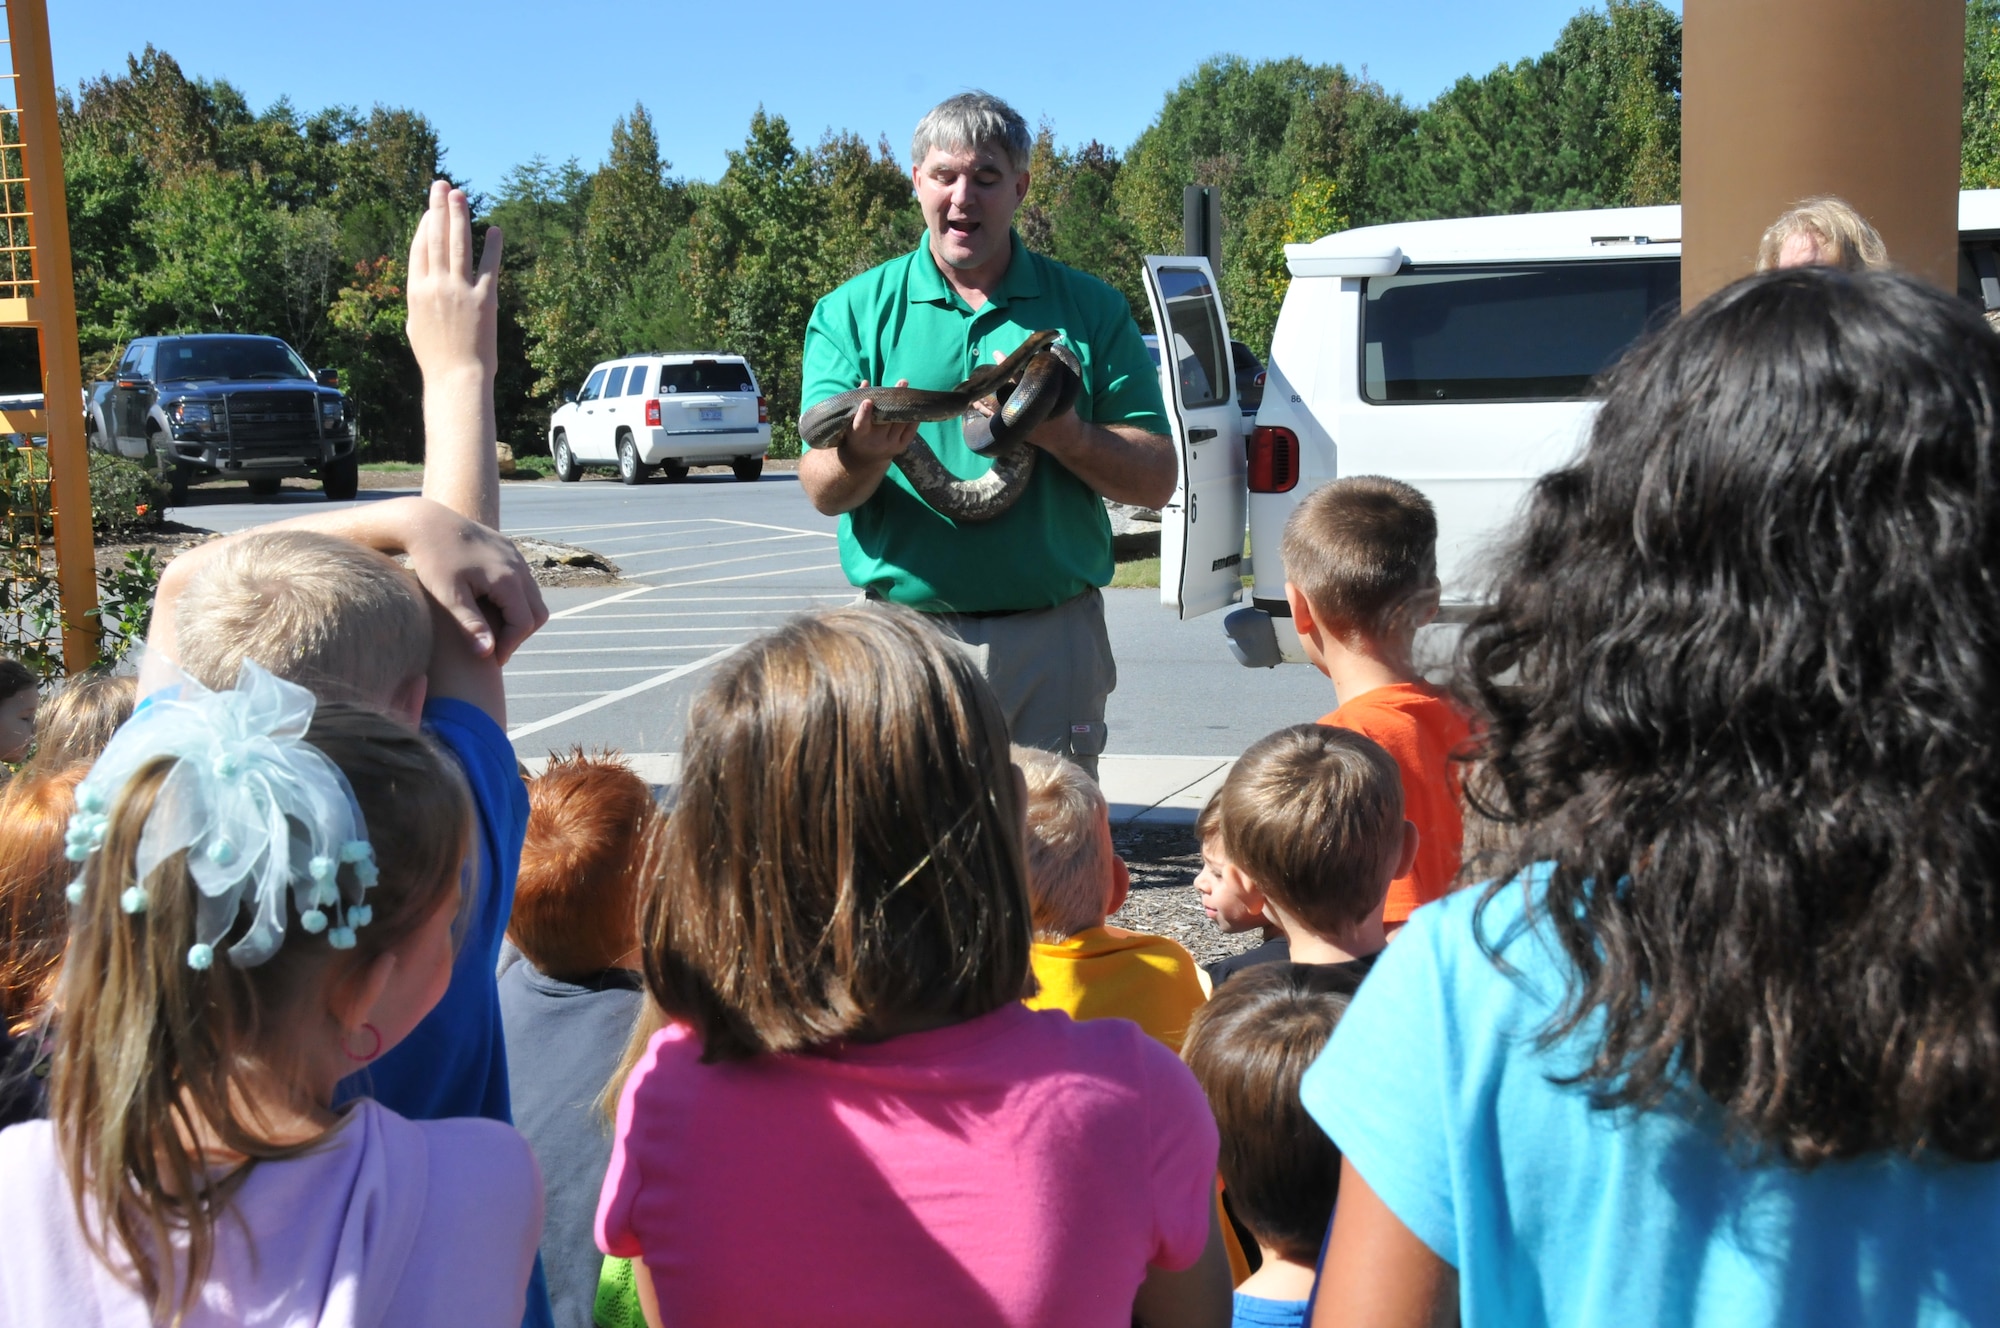 Children look on as a zookeeper shows a snake Oct. 4 at the North Carolina Zoo, Charlotte, N.C. More than 300 Airmen and family members from the 24th Special Operations from Fort Bragg were hosted by Operation Resolute for a day of fun and fellowship there. (U.S. Air Force photo by Maj. Lisa Ray/Released)